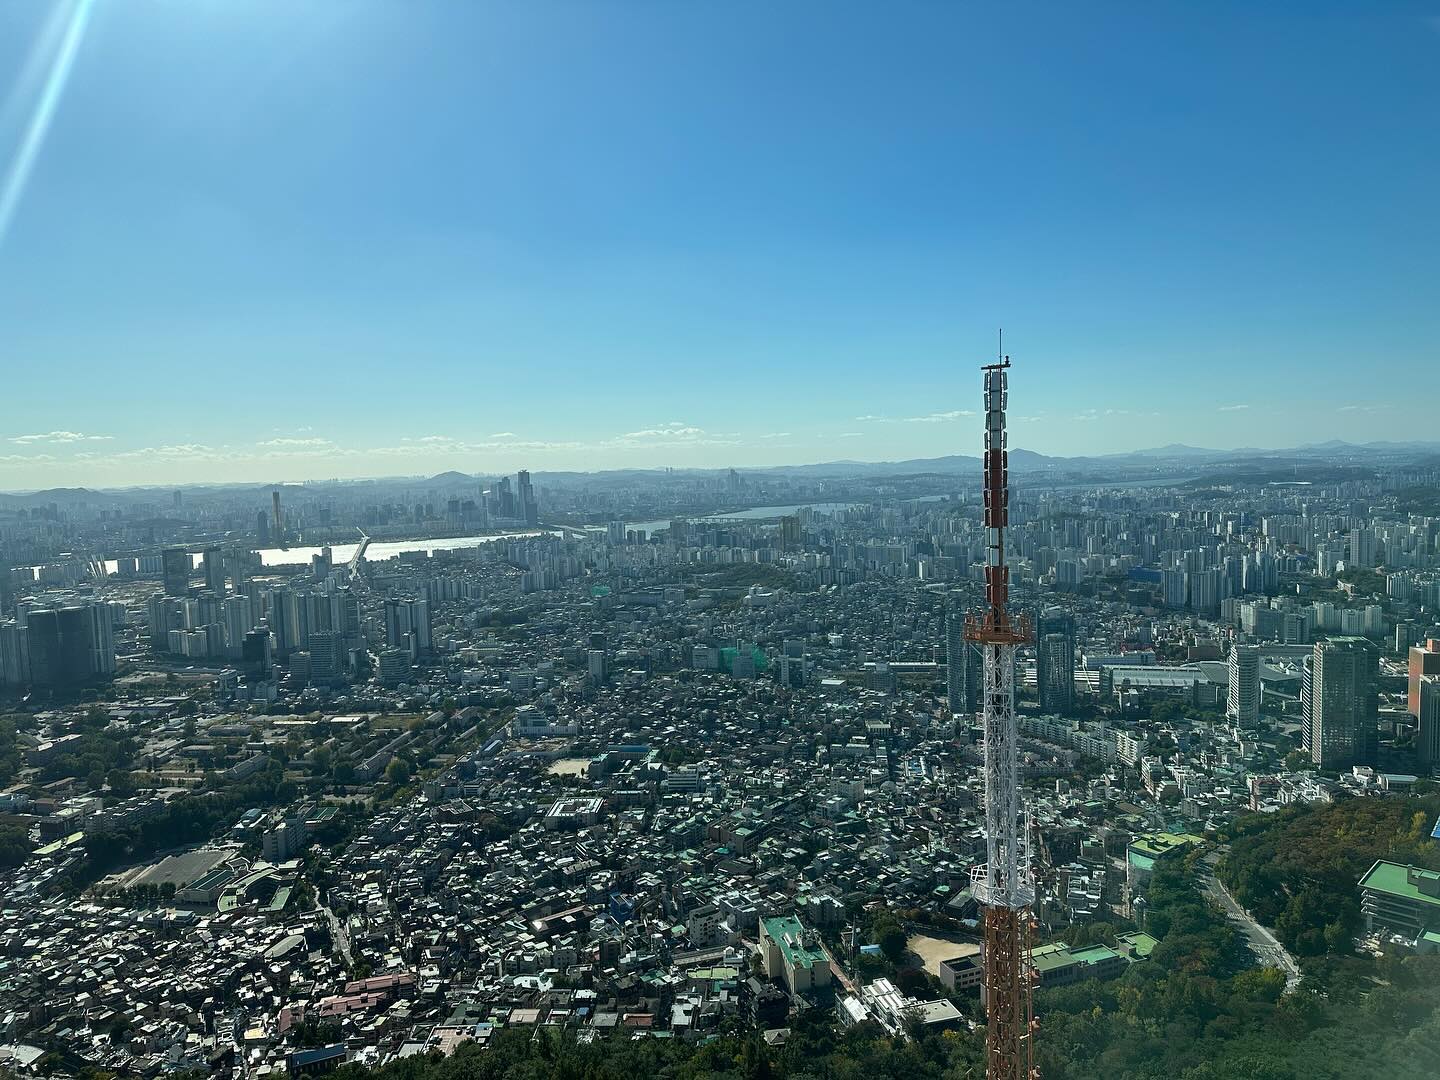 View of Seoul from the top of N Seoul Tower